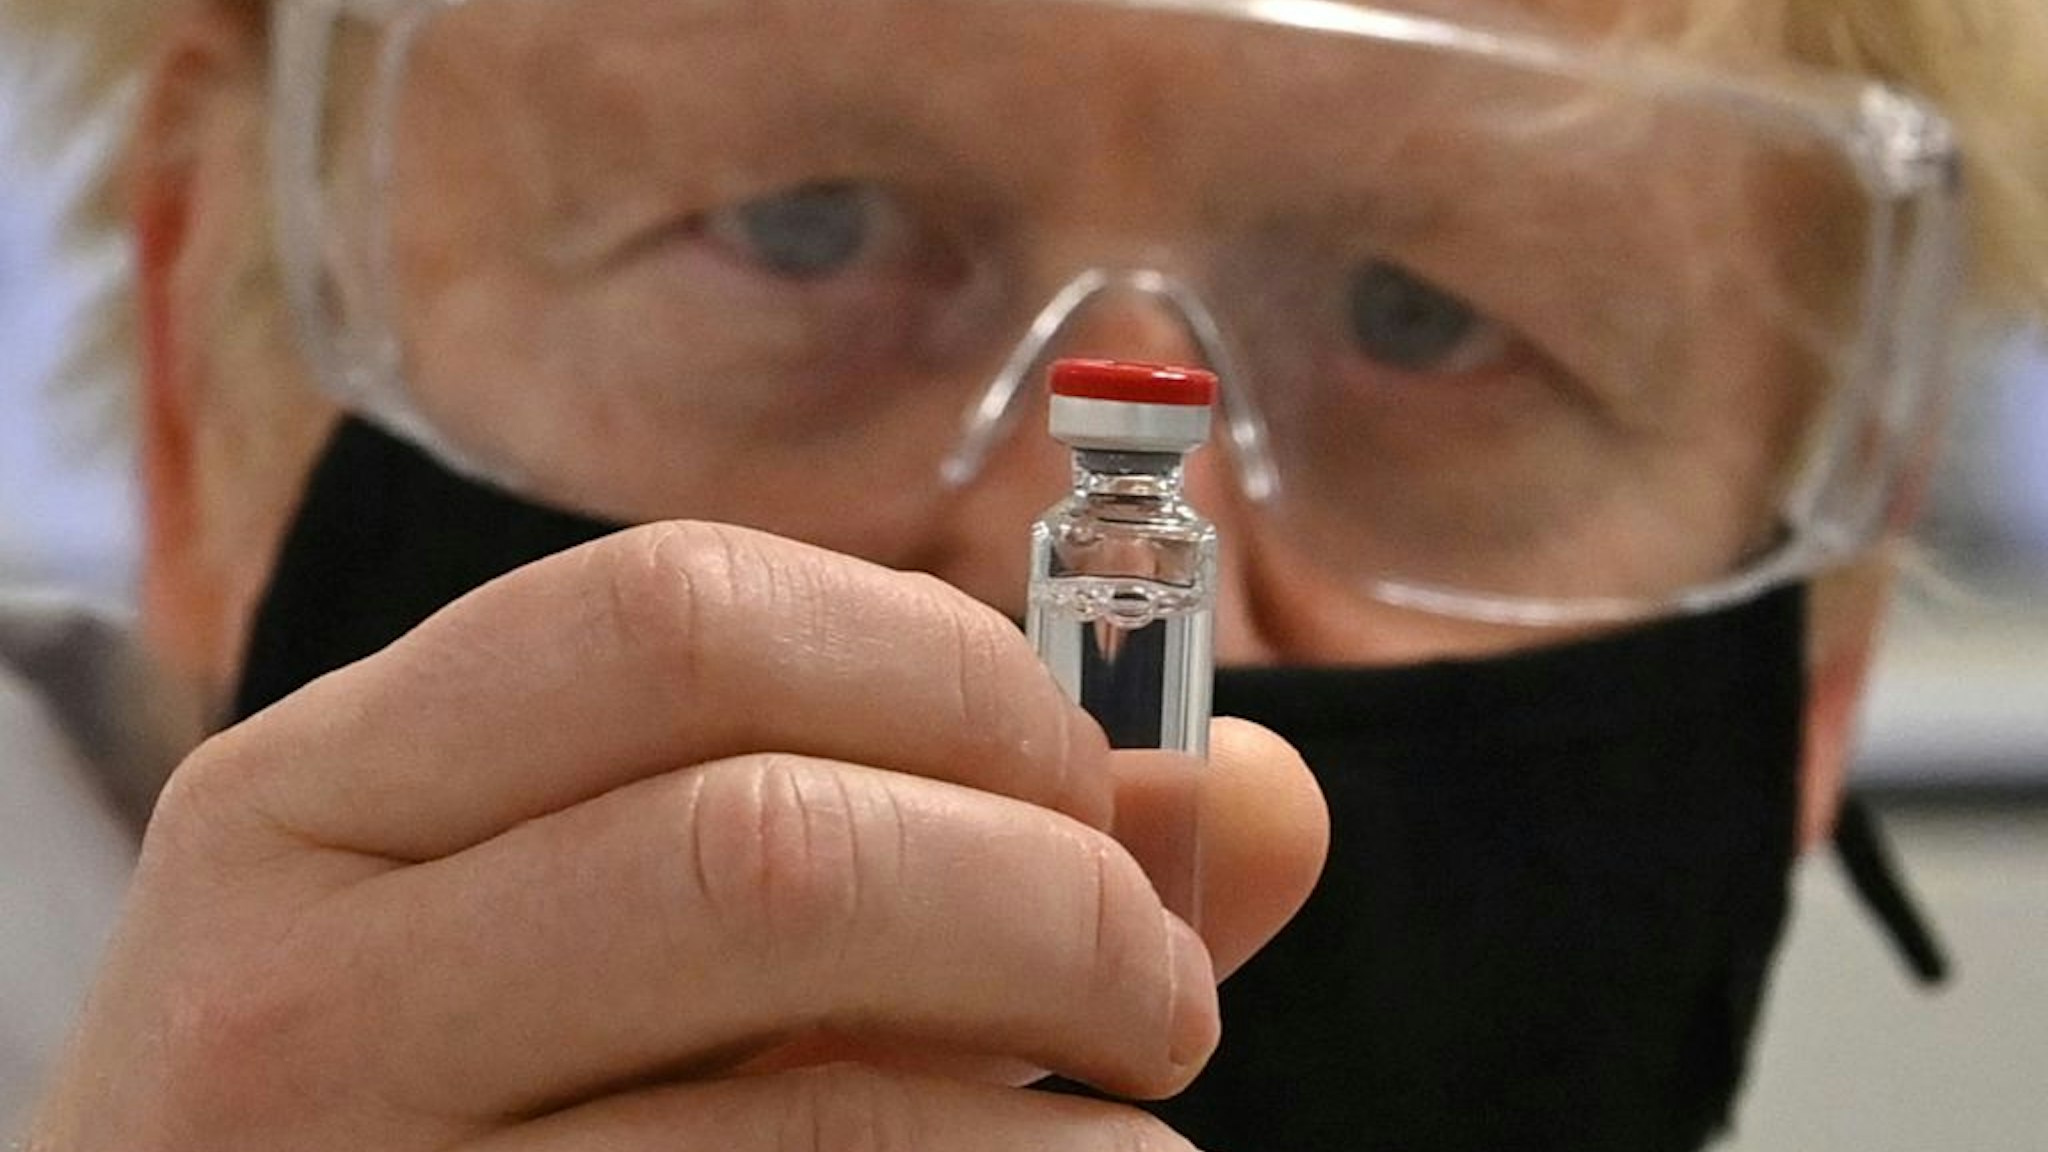 WREXHAM, WALES - NOVEMBER 30: UK Prime Minister Boris Johnson poses for a photograph with a vial of the AstraZeneca/Oxford University COVID-19 candidate vaccine, known as AZD1222, at Wockhardt's pharmaceutical manufacturing facility on November 30, 2020 in Wrexham, Wales. The UK government announced a deal in August with global pharmaceutical and biotechnology company Wockhardt, to increase capacity in a crucial part of the manufacturing process for Covid-19 vaccines. Britain has been Europe's worst-hit country during the pandemic, recording more than 57,000 deaths from some 1.6 million cases. (Photo by Paul Ellis - WPA Pool/Getty Images)